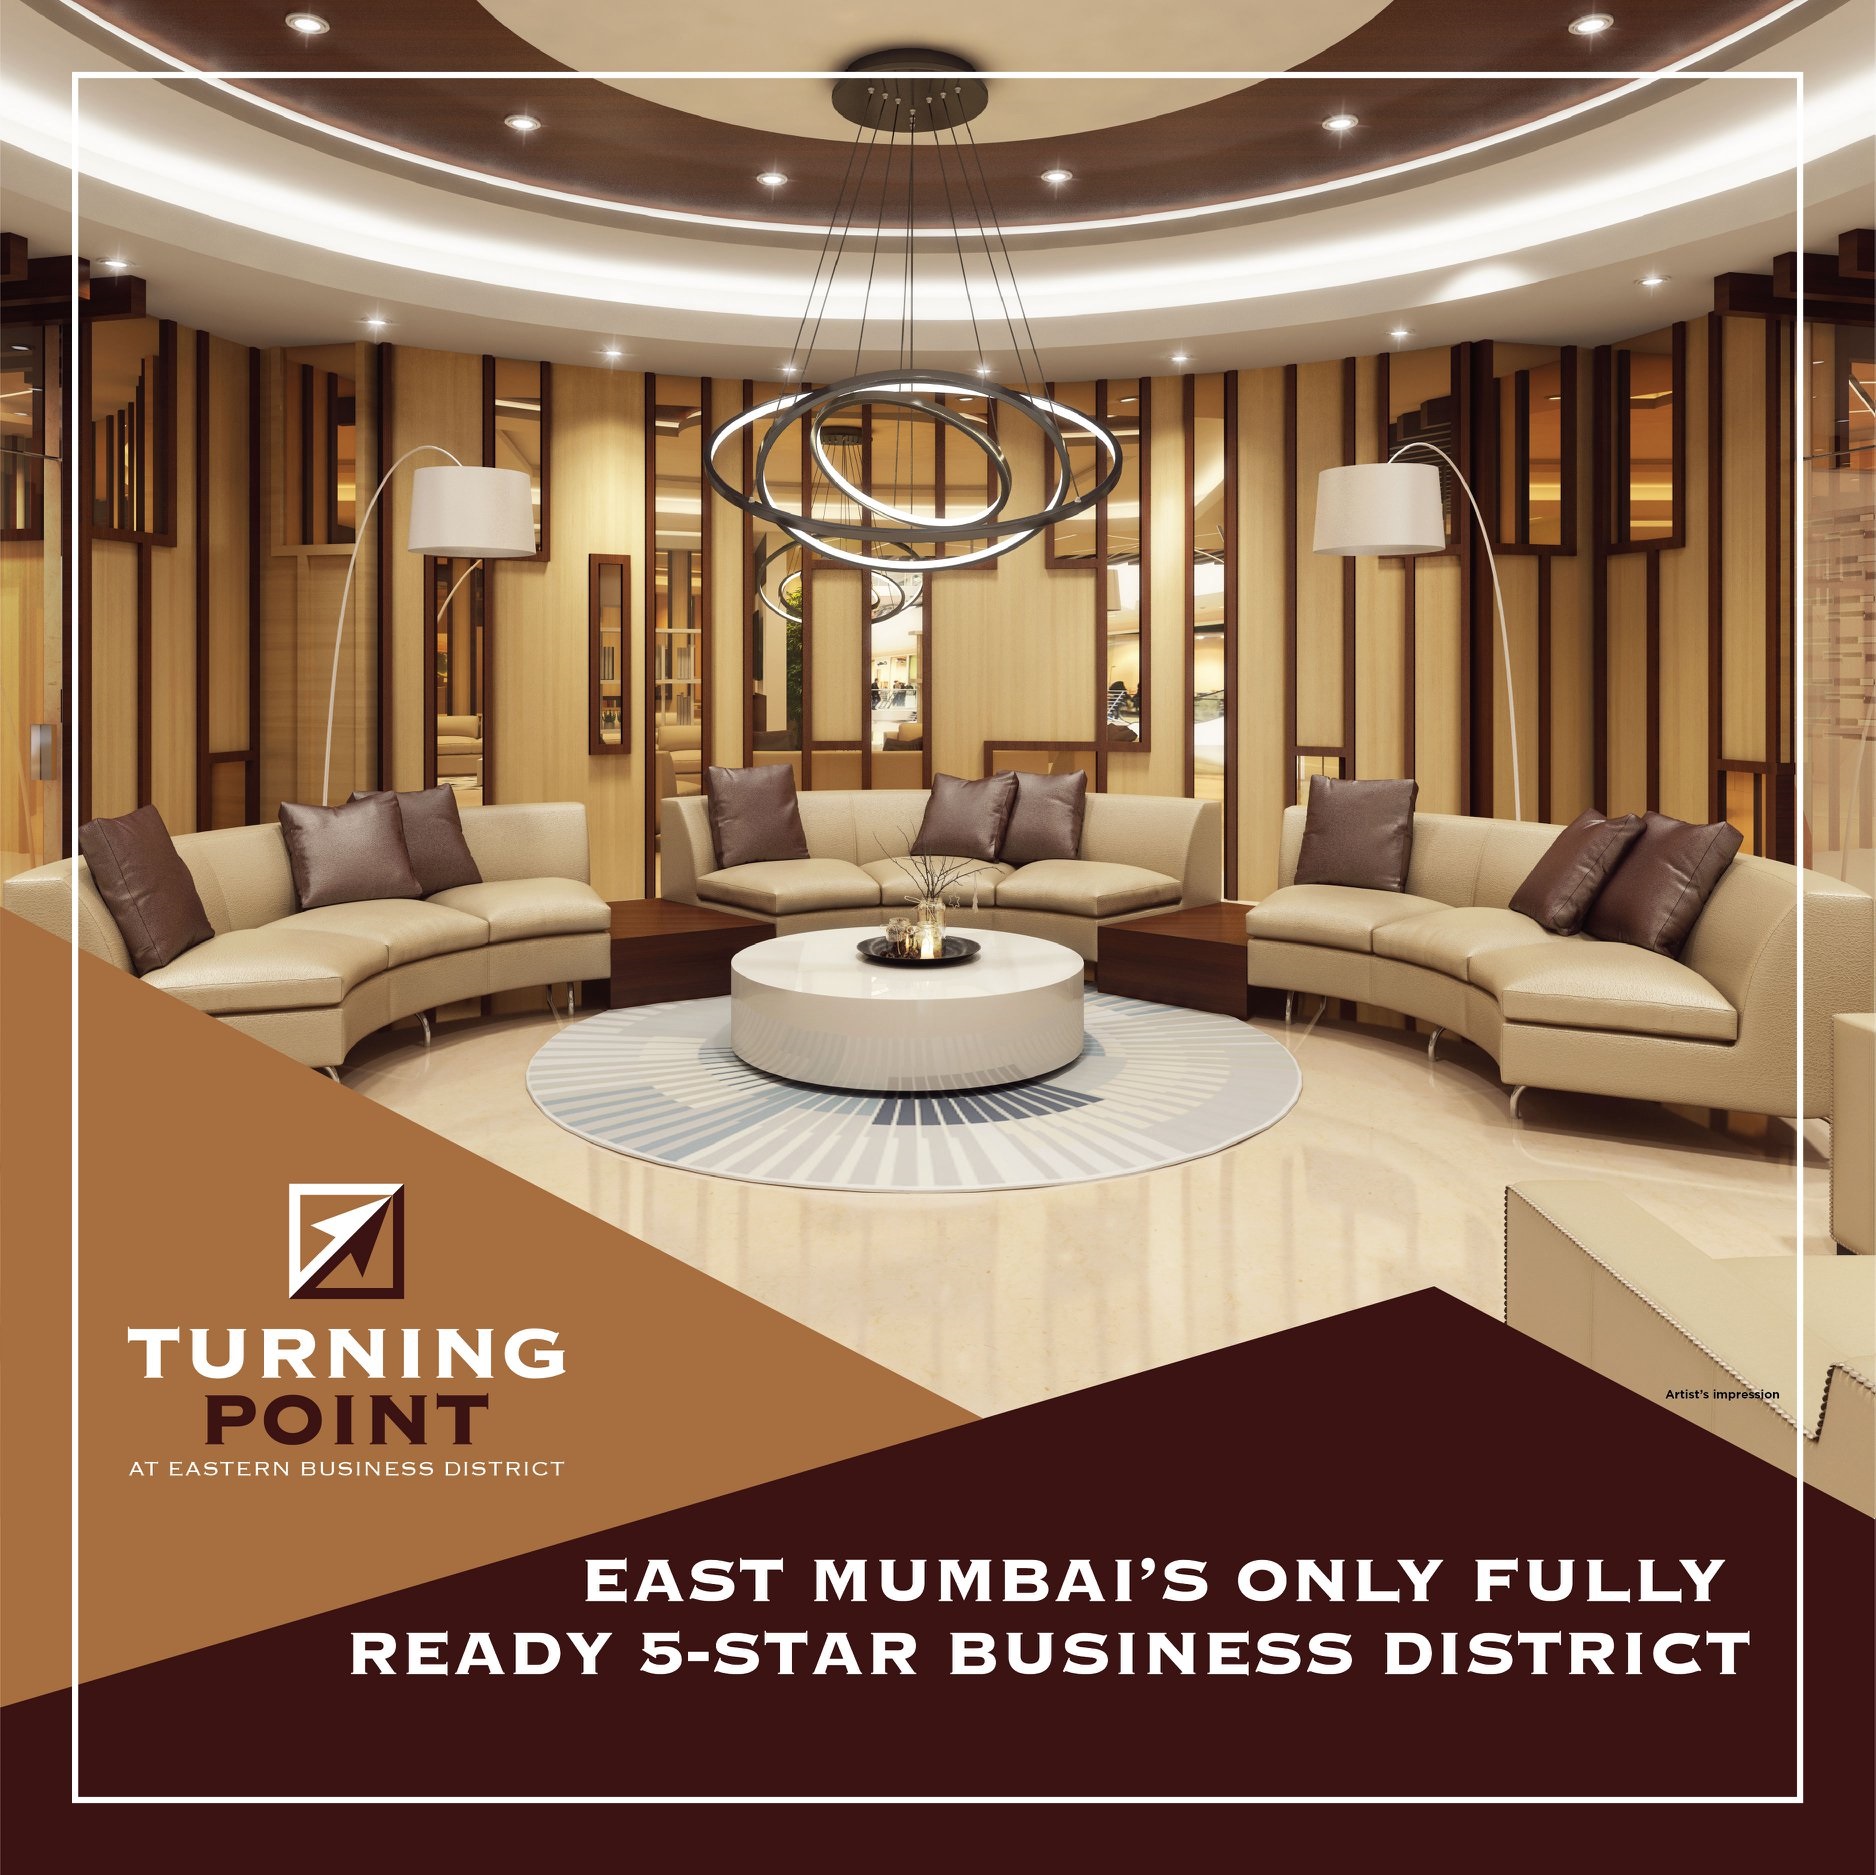 East Mumbai Only Fully Ready 5 Star Eastern Business District Update